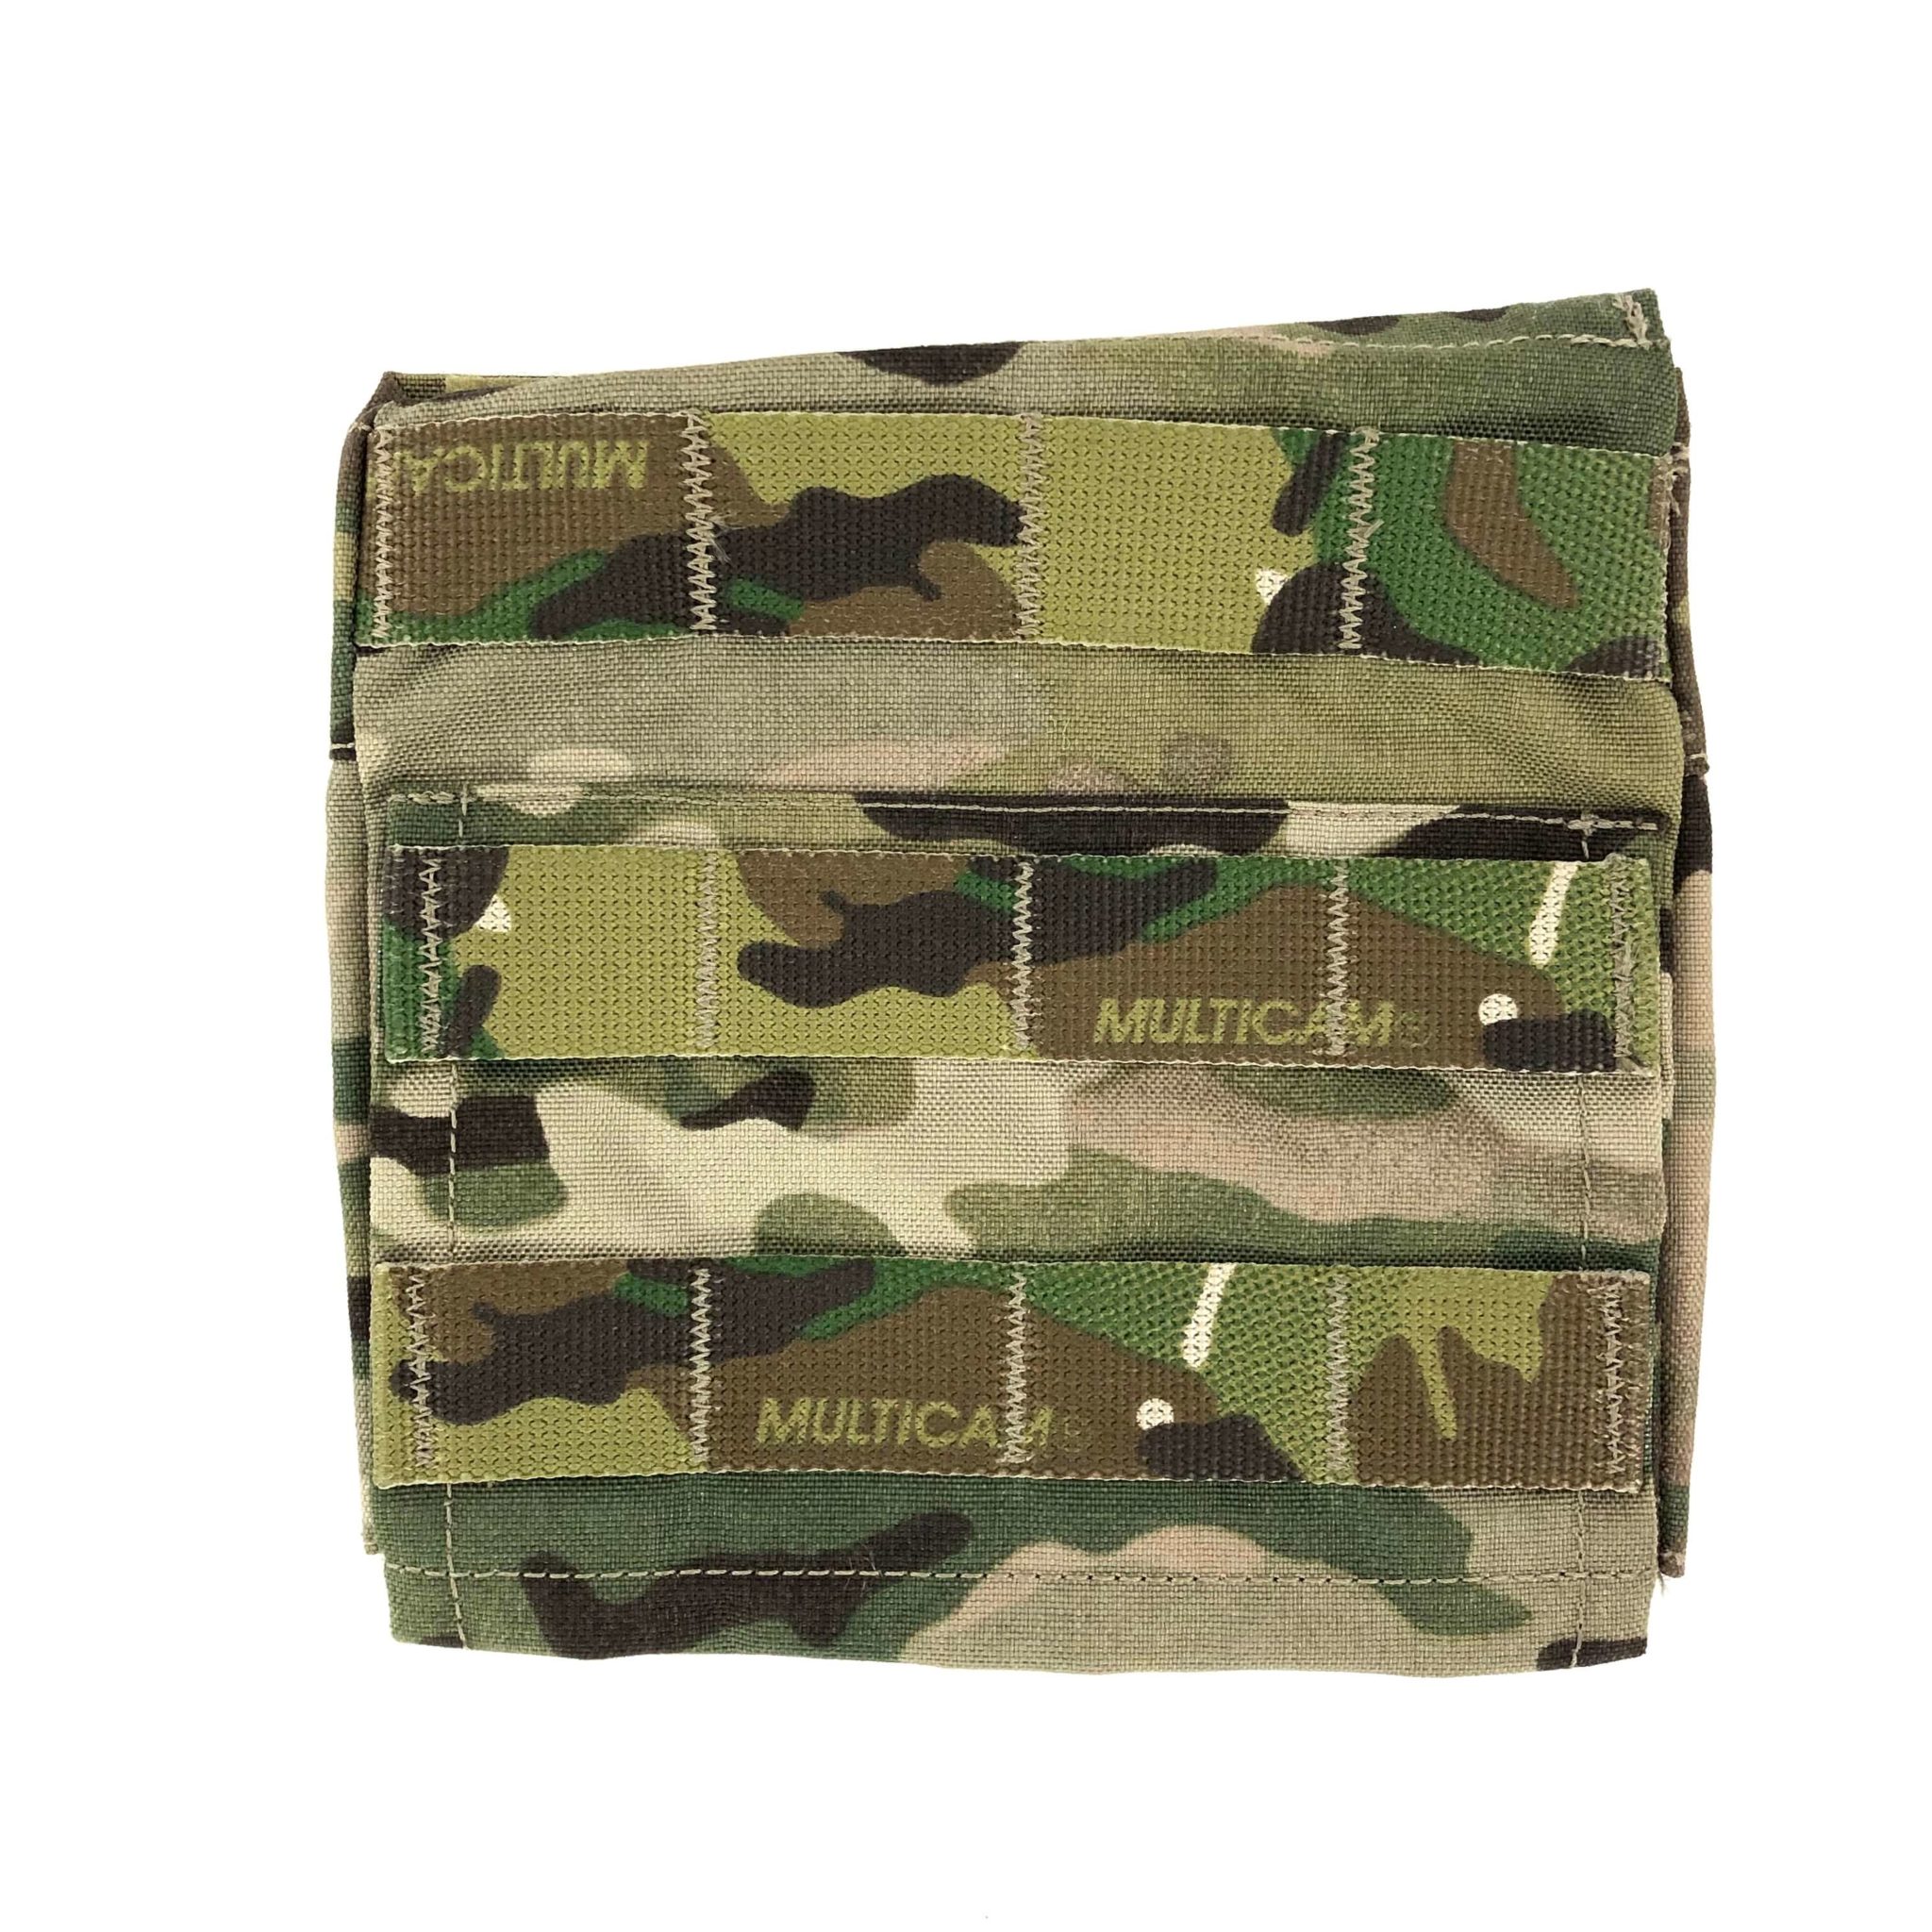 Multicam Crye Precision AVS 6" x 6" Side Armor Plate Pouch Carrier Set of 2 